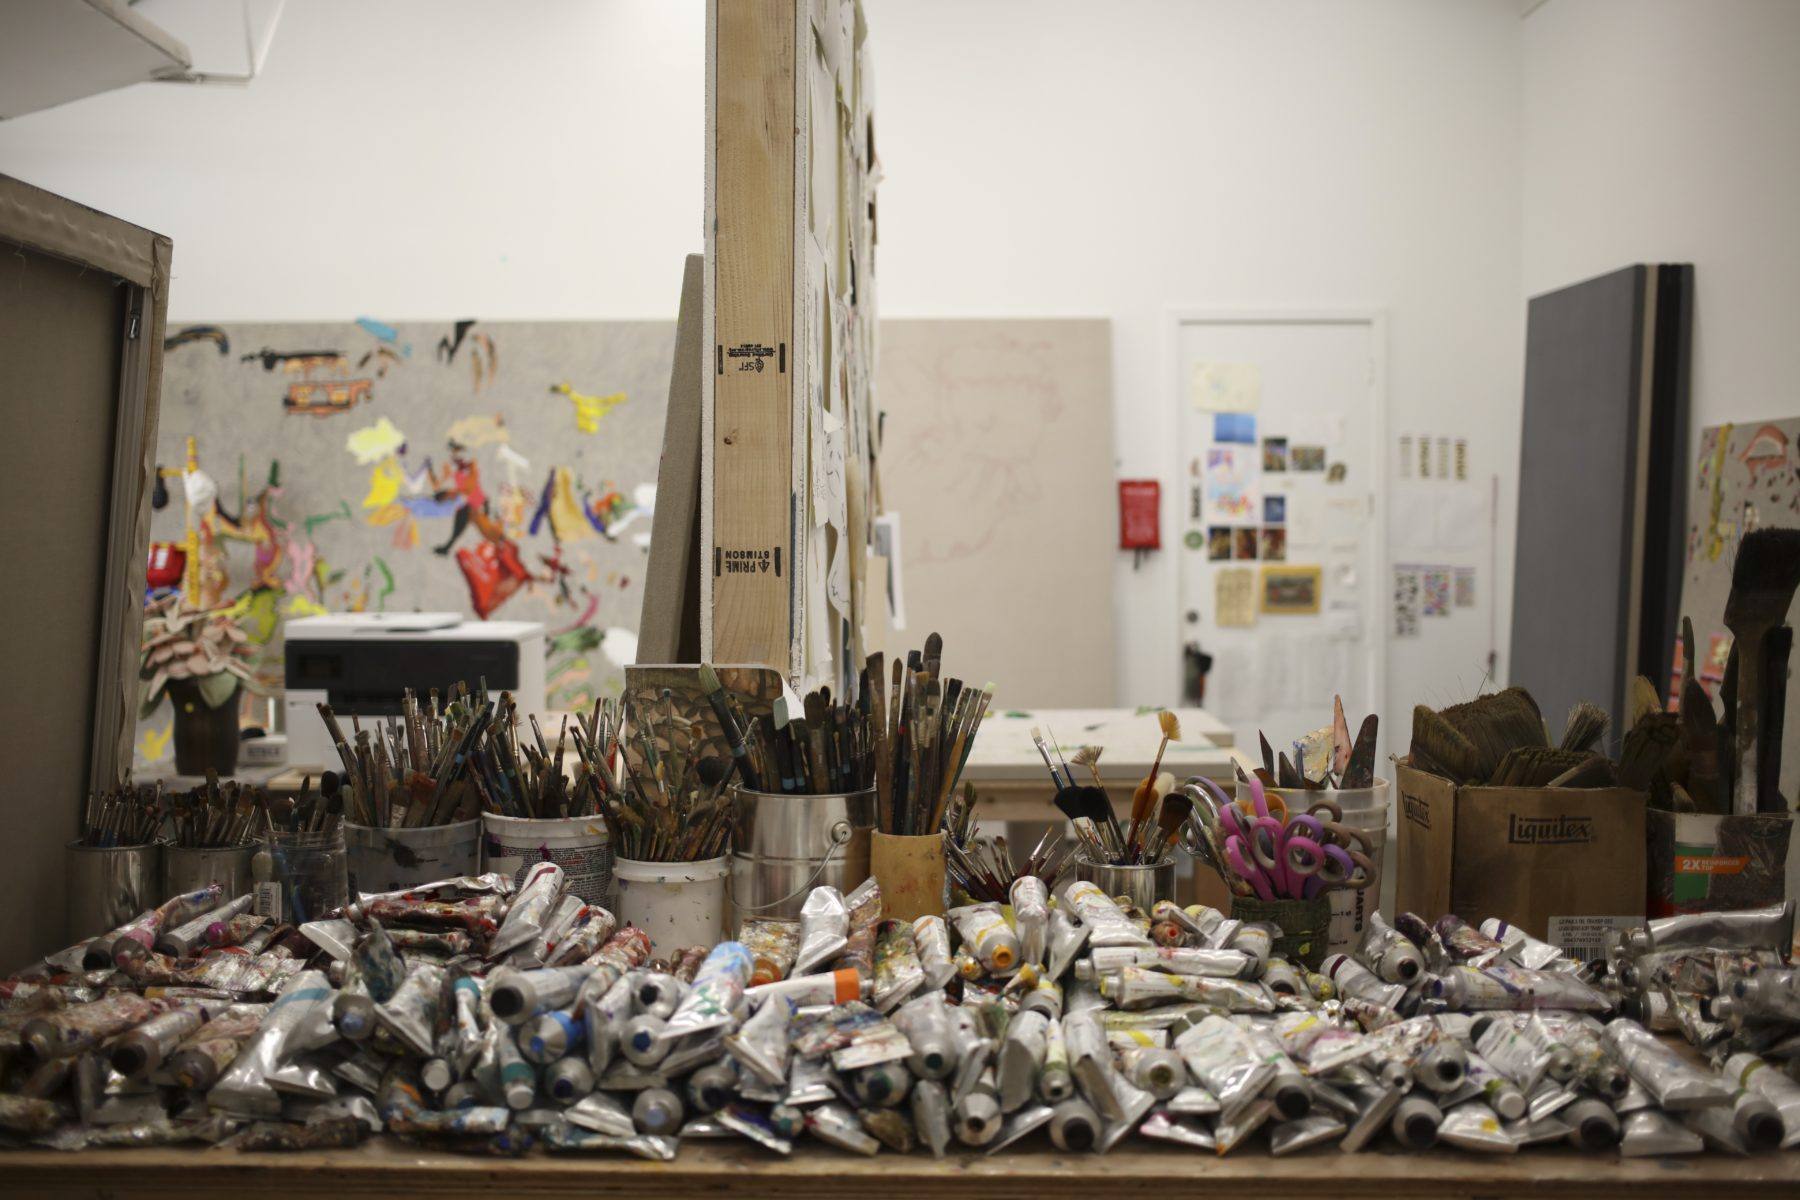 In Cindy Phenix's studio tubes of paint are piled upon one another in the foreground, with paintbrushes, canvases, and other painting materials within the frame.